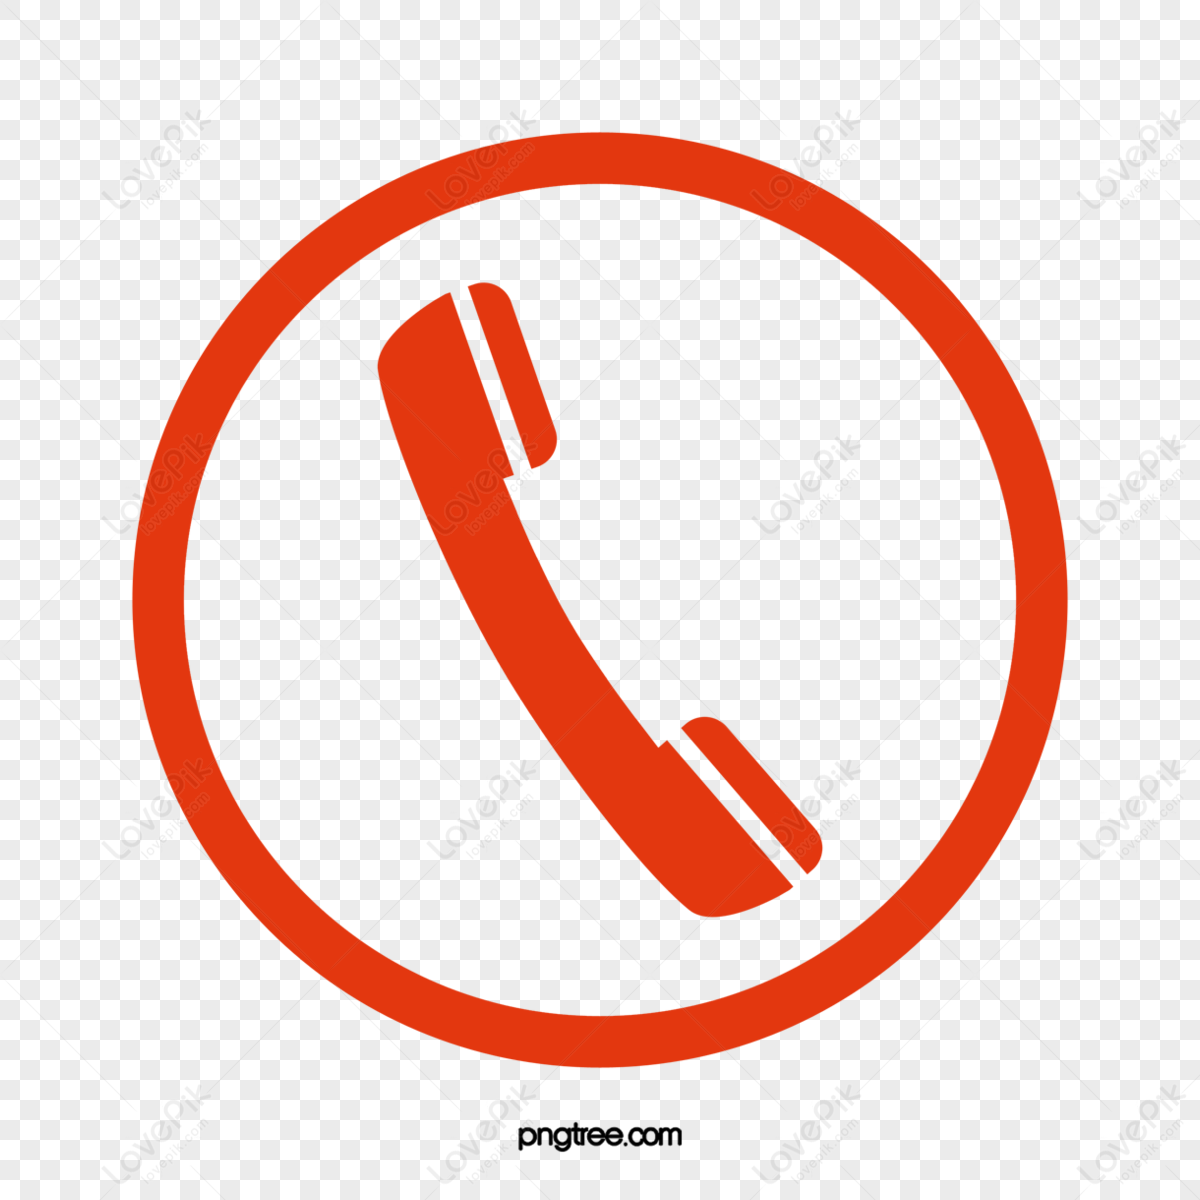 Contact Vector Icons Vector & Photo (Free Trial) | Bigstock